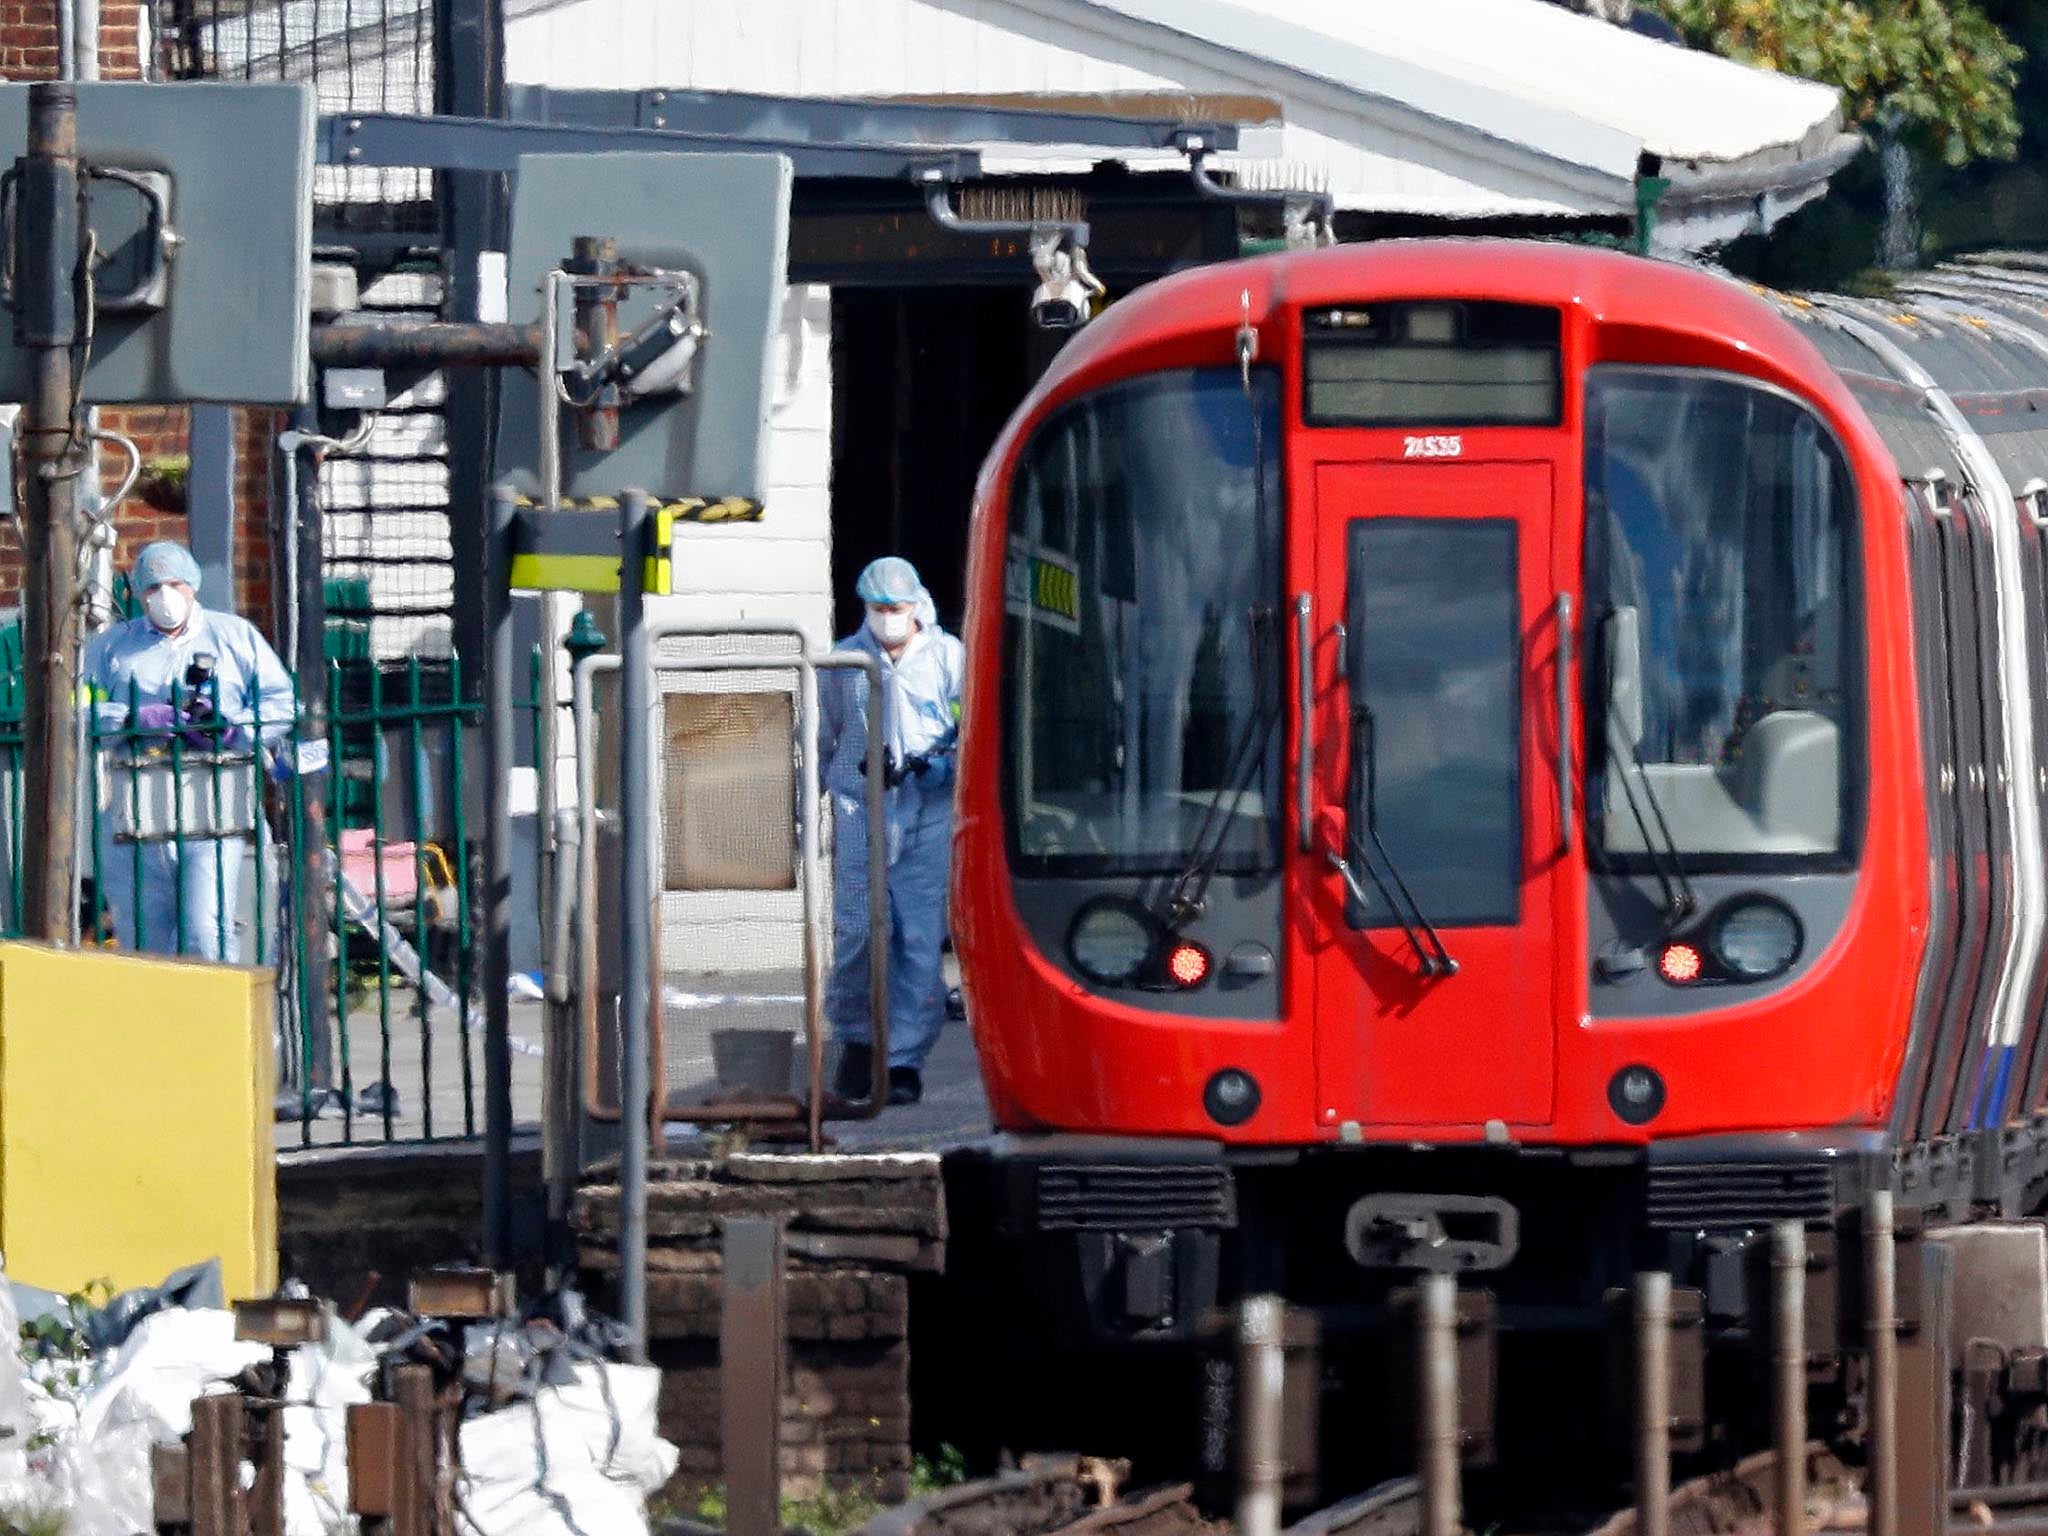 30 people were injured when an improvised explosive went off on a busy Tube train